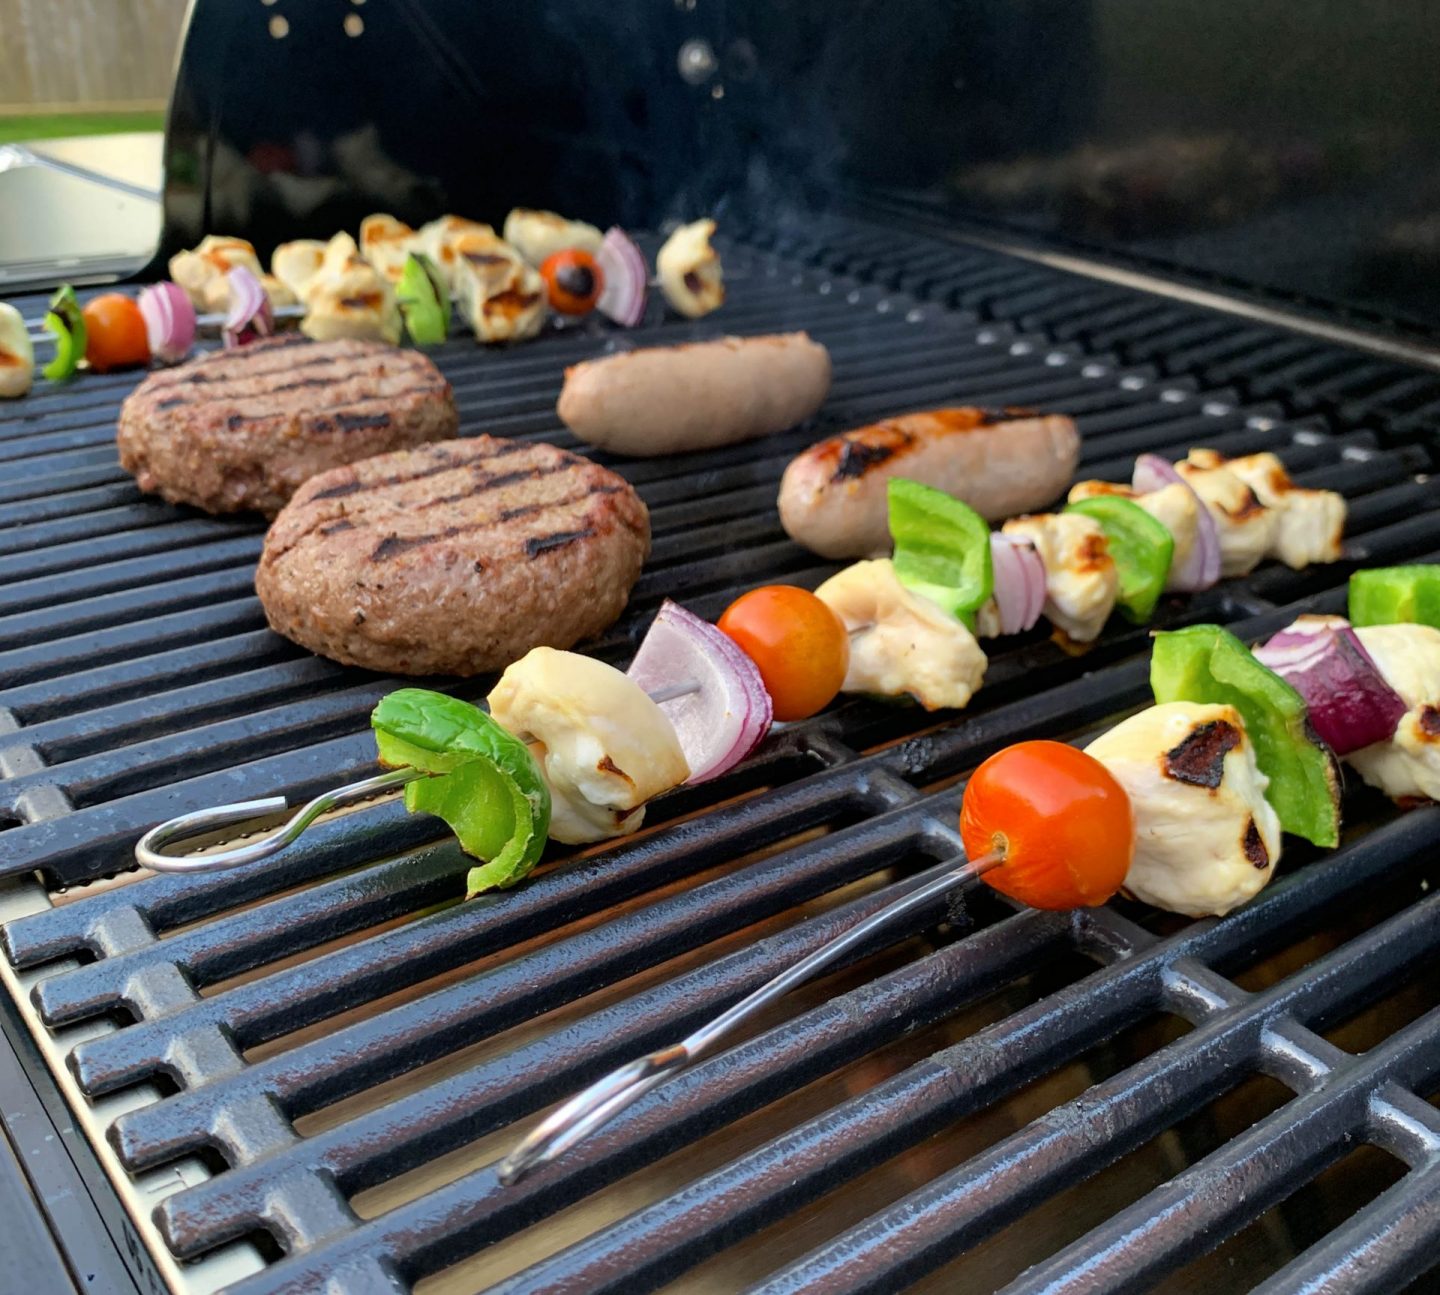 Food cooking on a gas grill